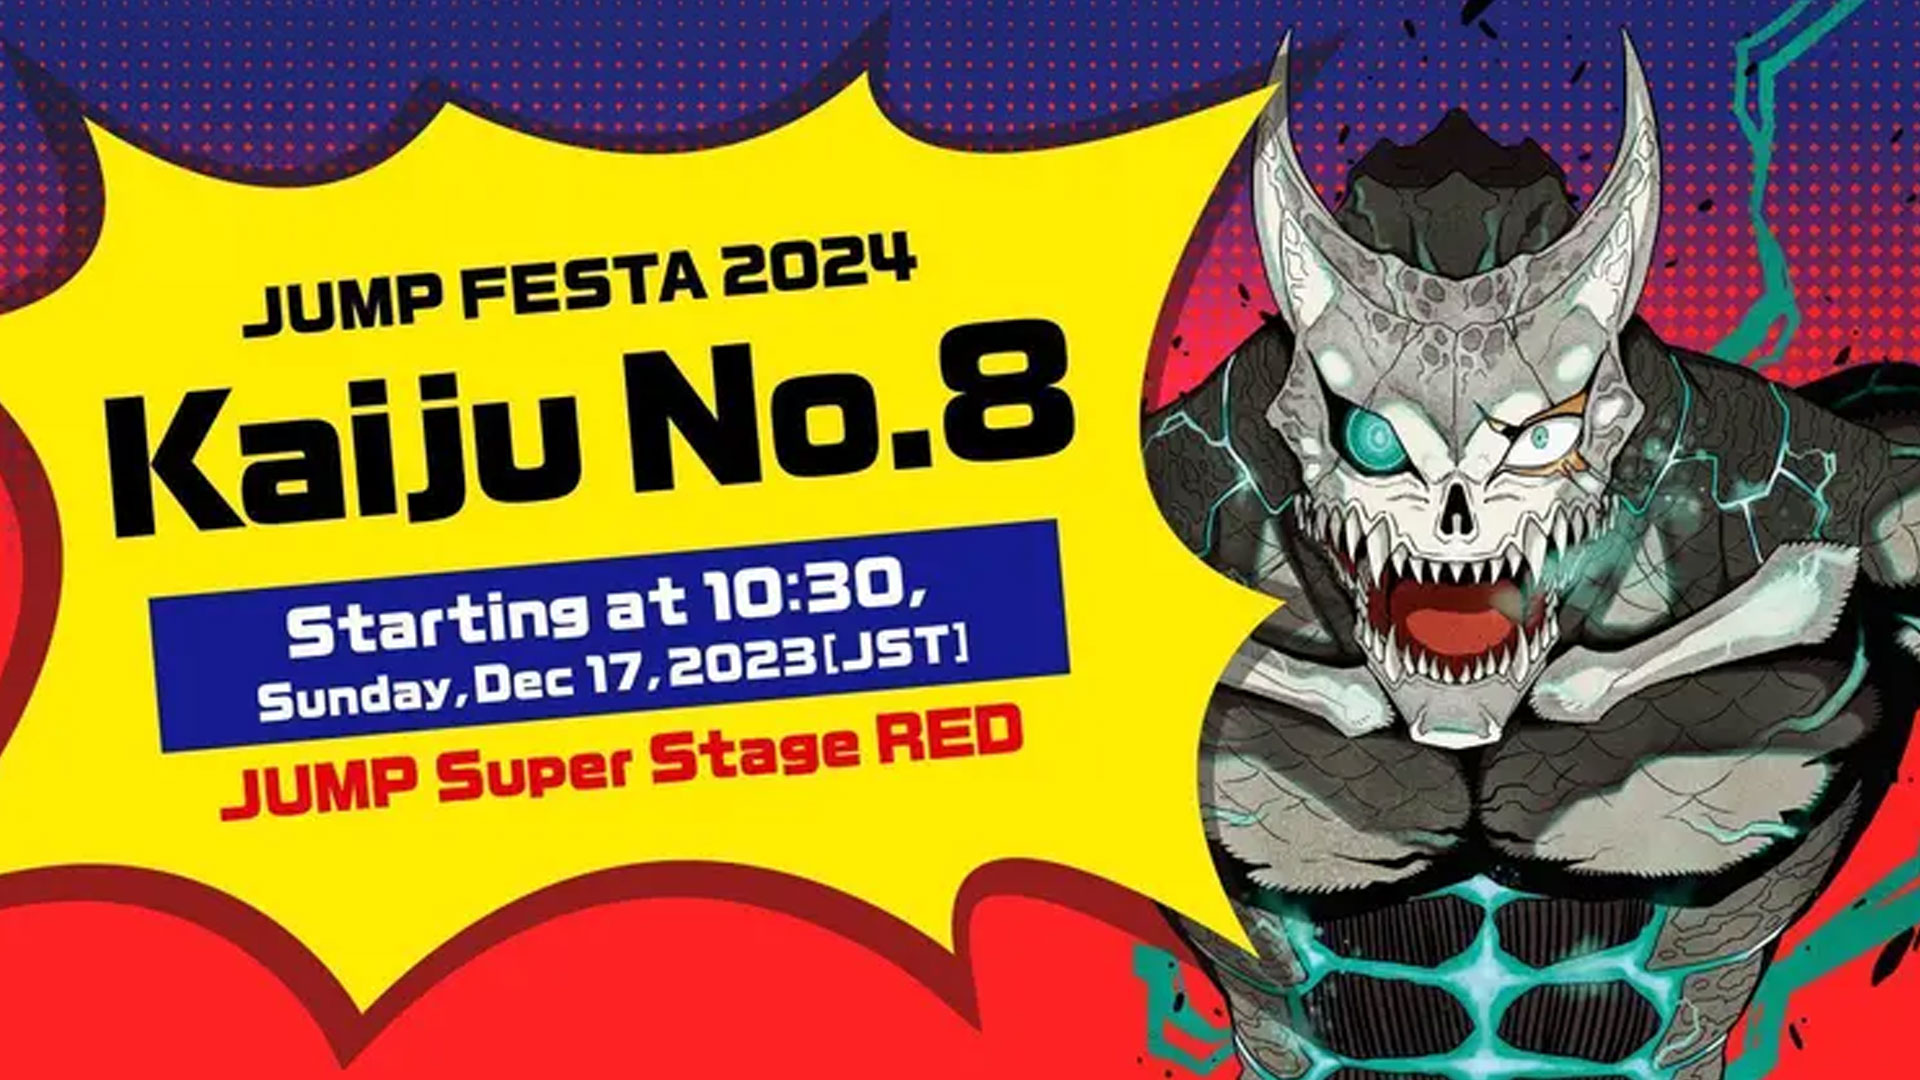 Kaiju No. 8 is Going to Reveal New Information at Jump Festa 2024